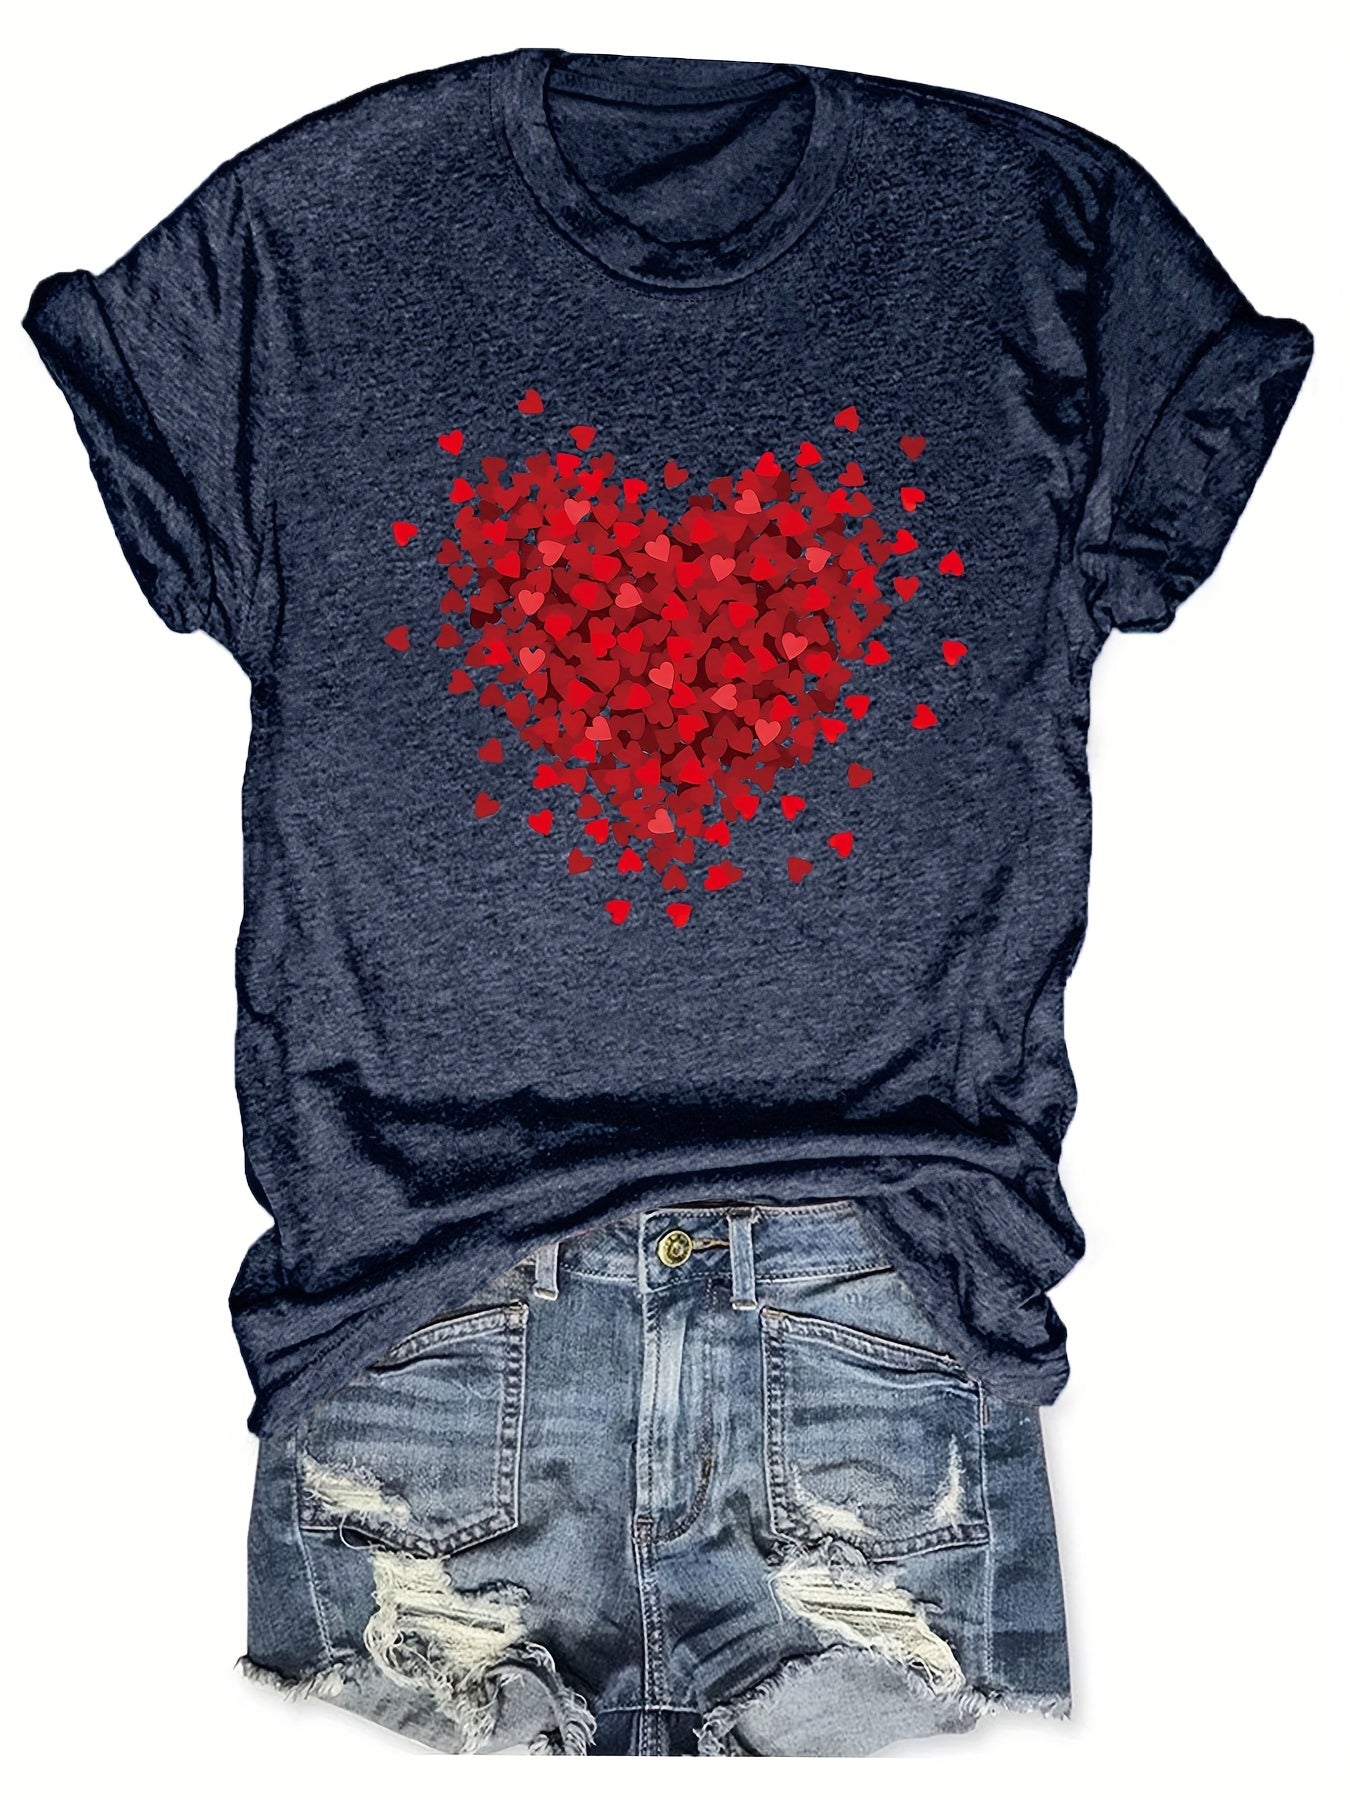 Valentine's Day Heart Print T-Shirt, Casual Crew Neck Short Sleeve Top